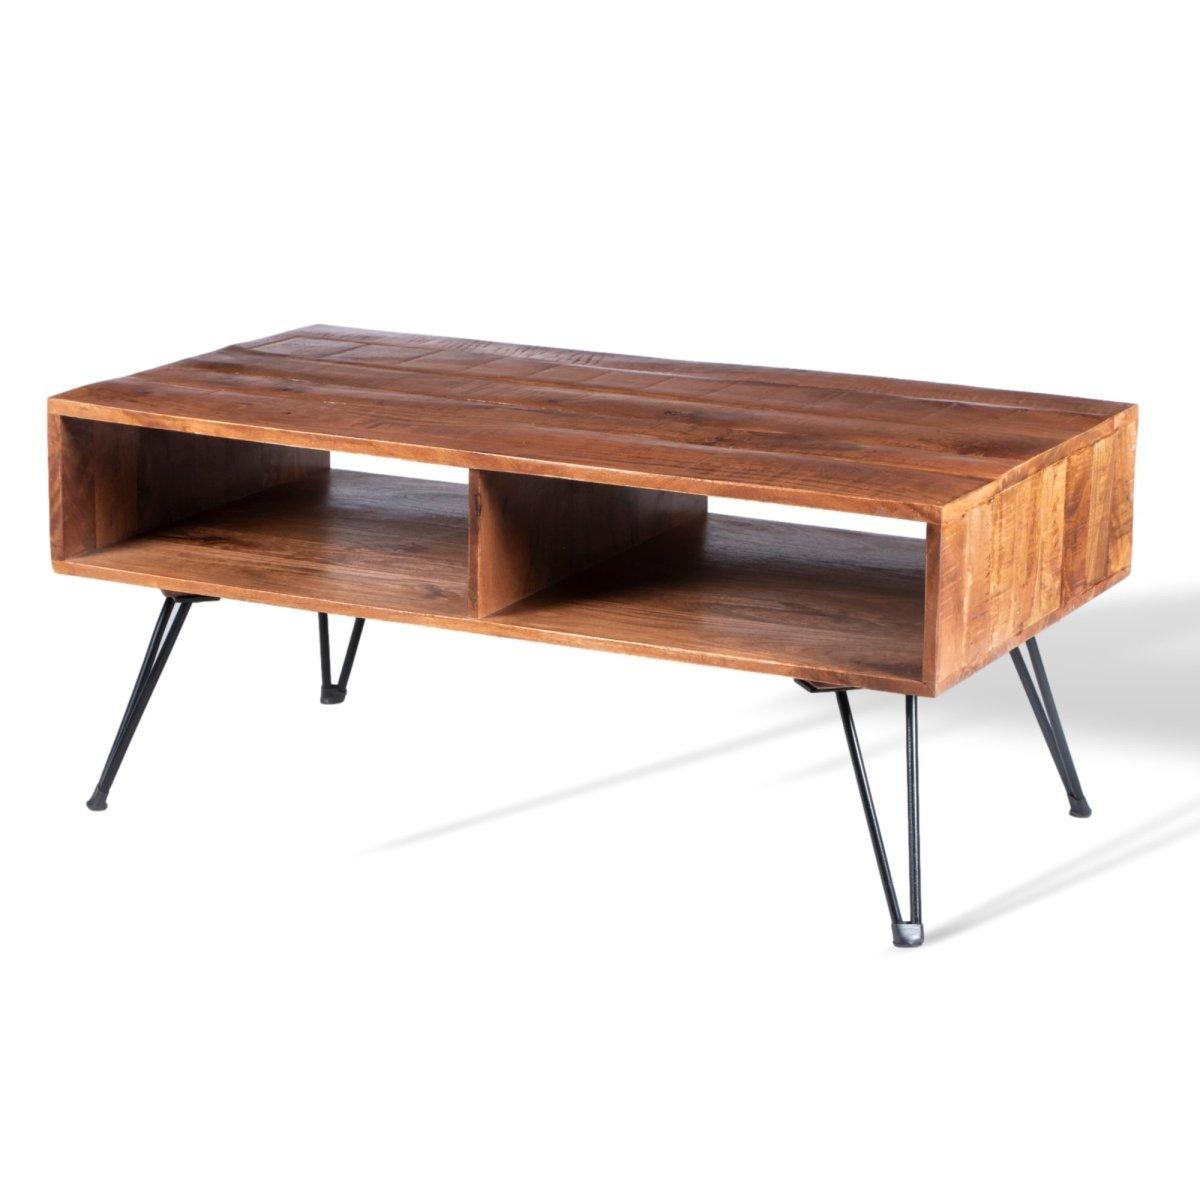 Open Mango Wood Coffee Table - Rustic Furniture Outlet